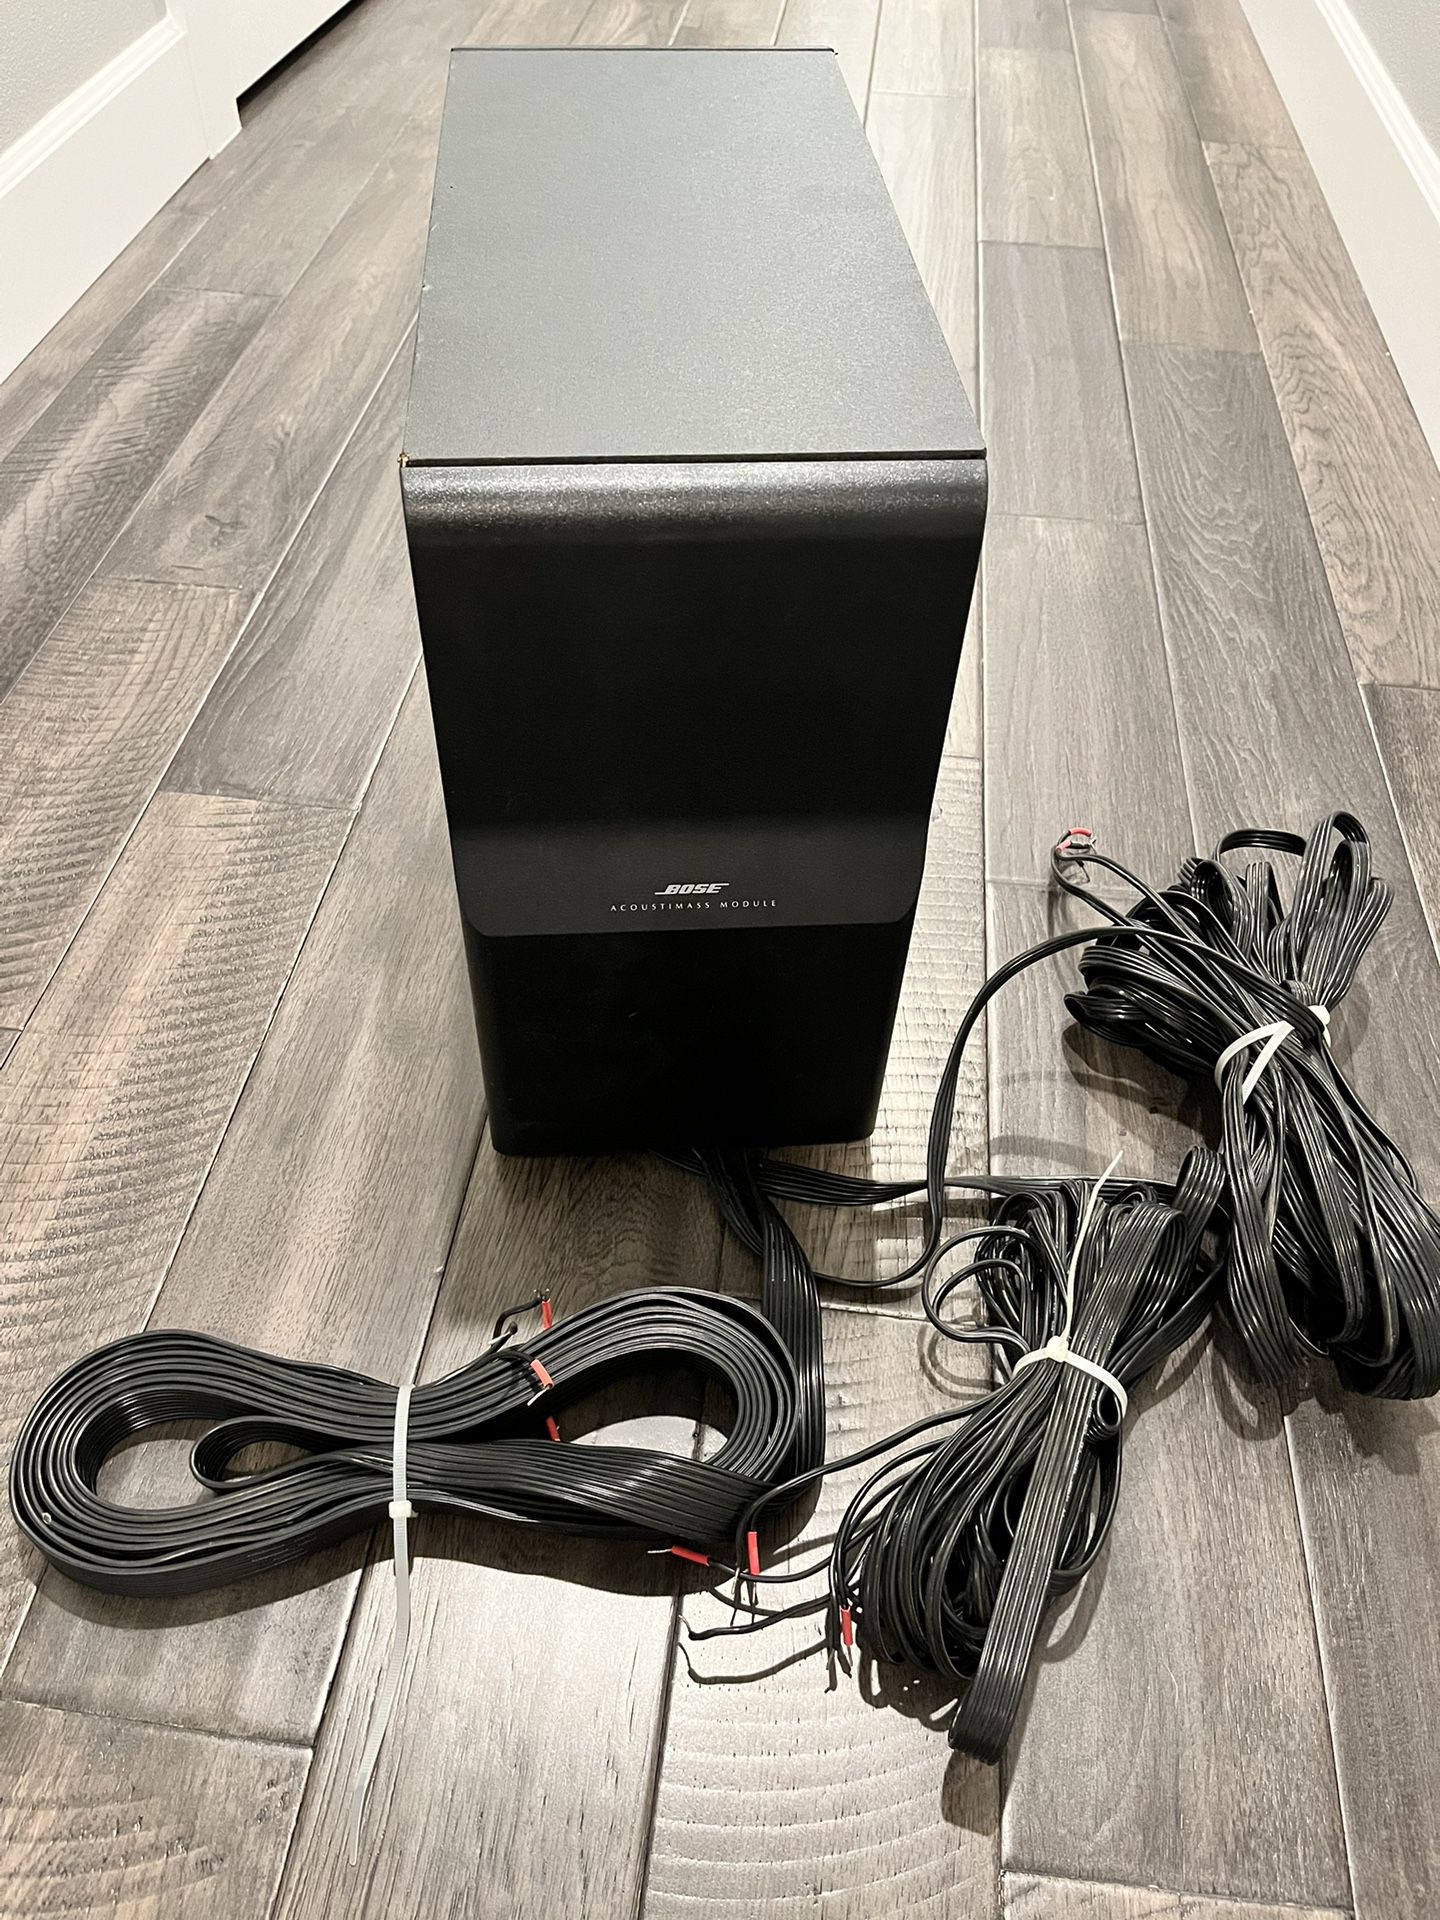 BOSE Acoustimass 6 Series II Home Theatre Speaker System